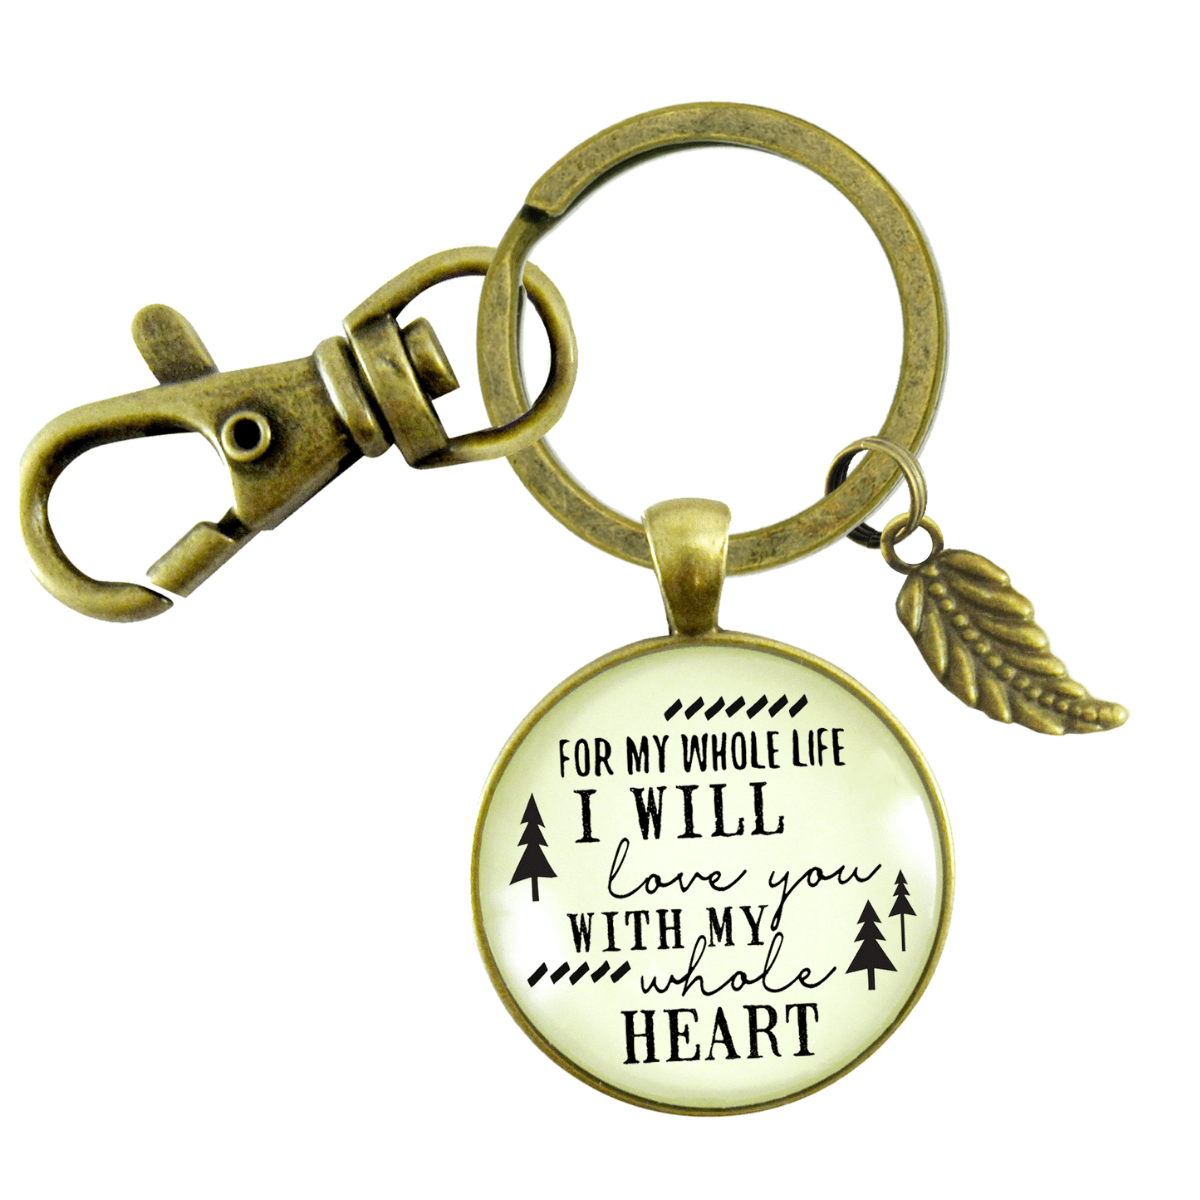 My Future Husband Keychain Gift For Men I Will Love You Life Promise Bride To Groom Wedding - Gutsy Goodness